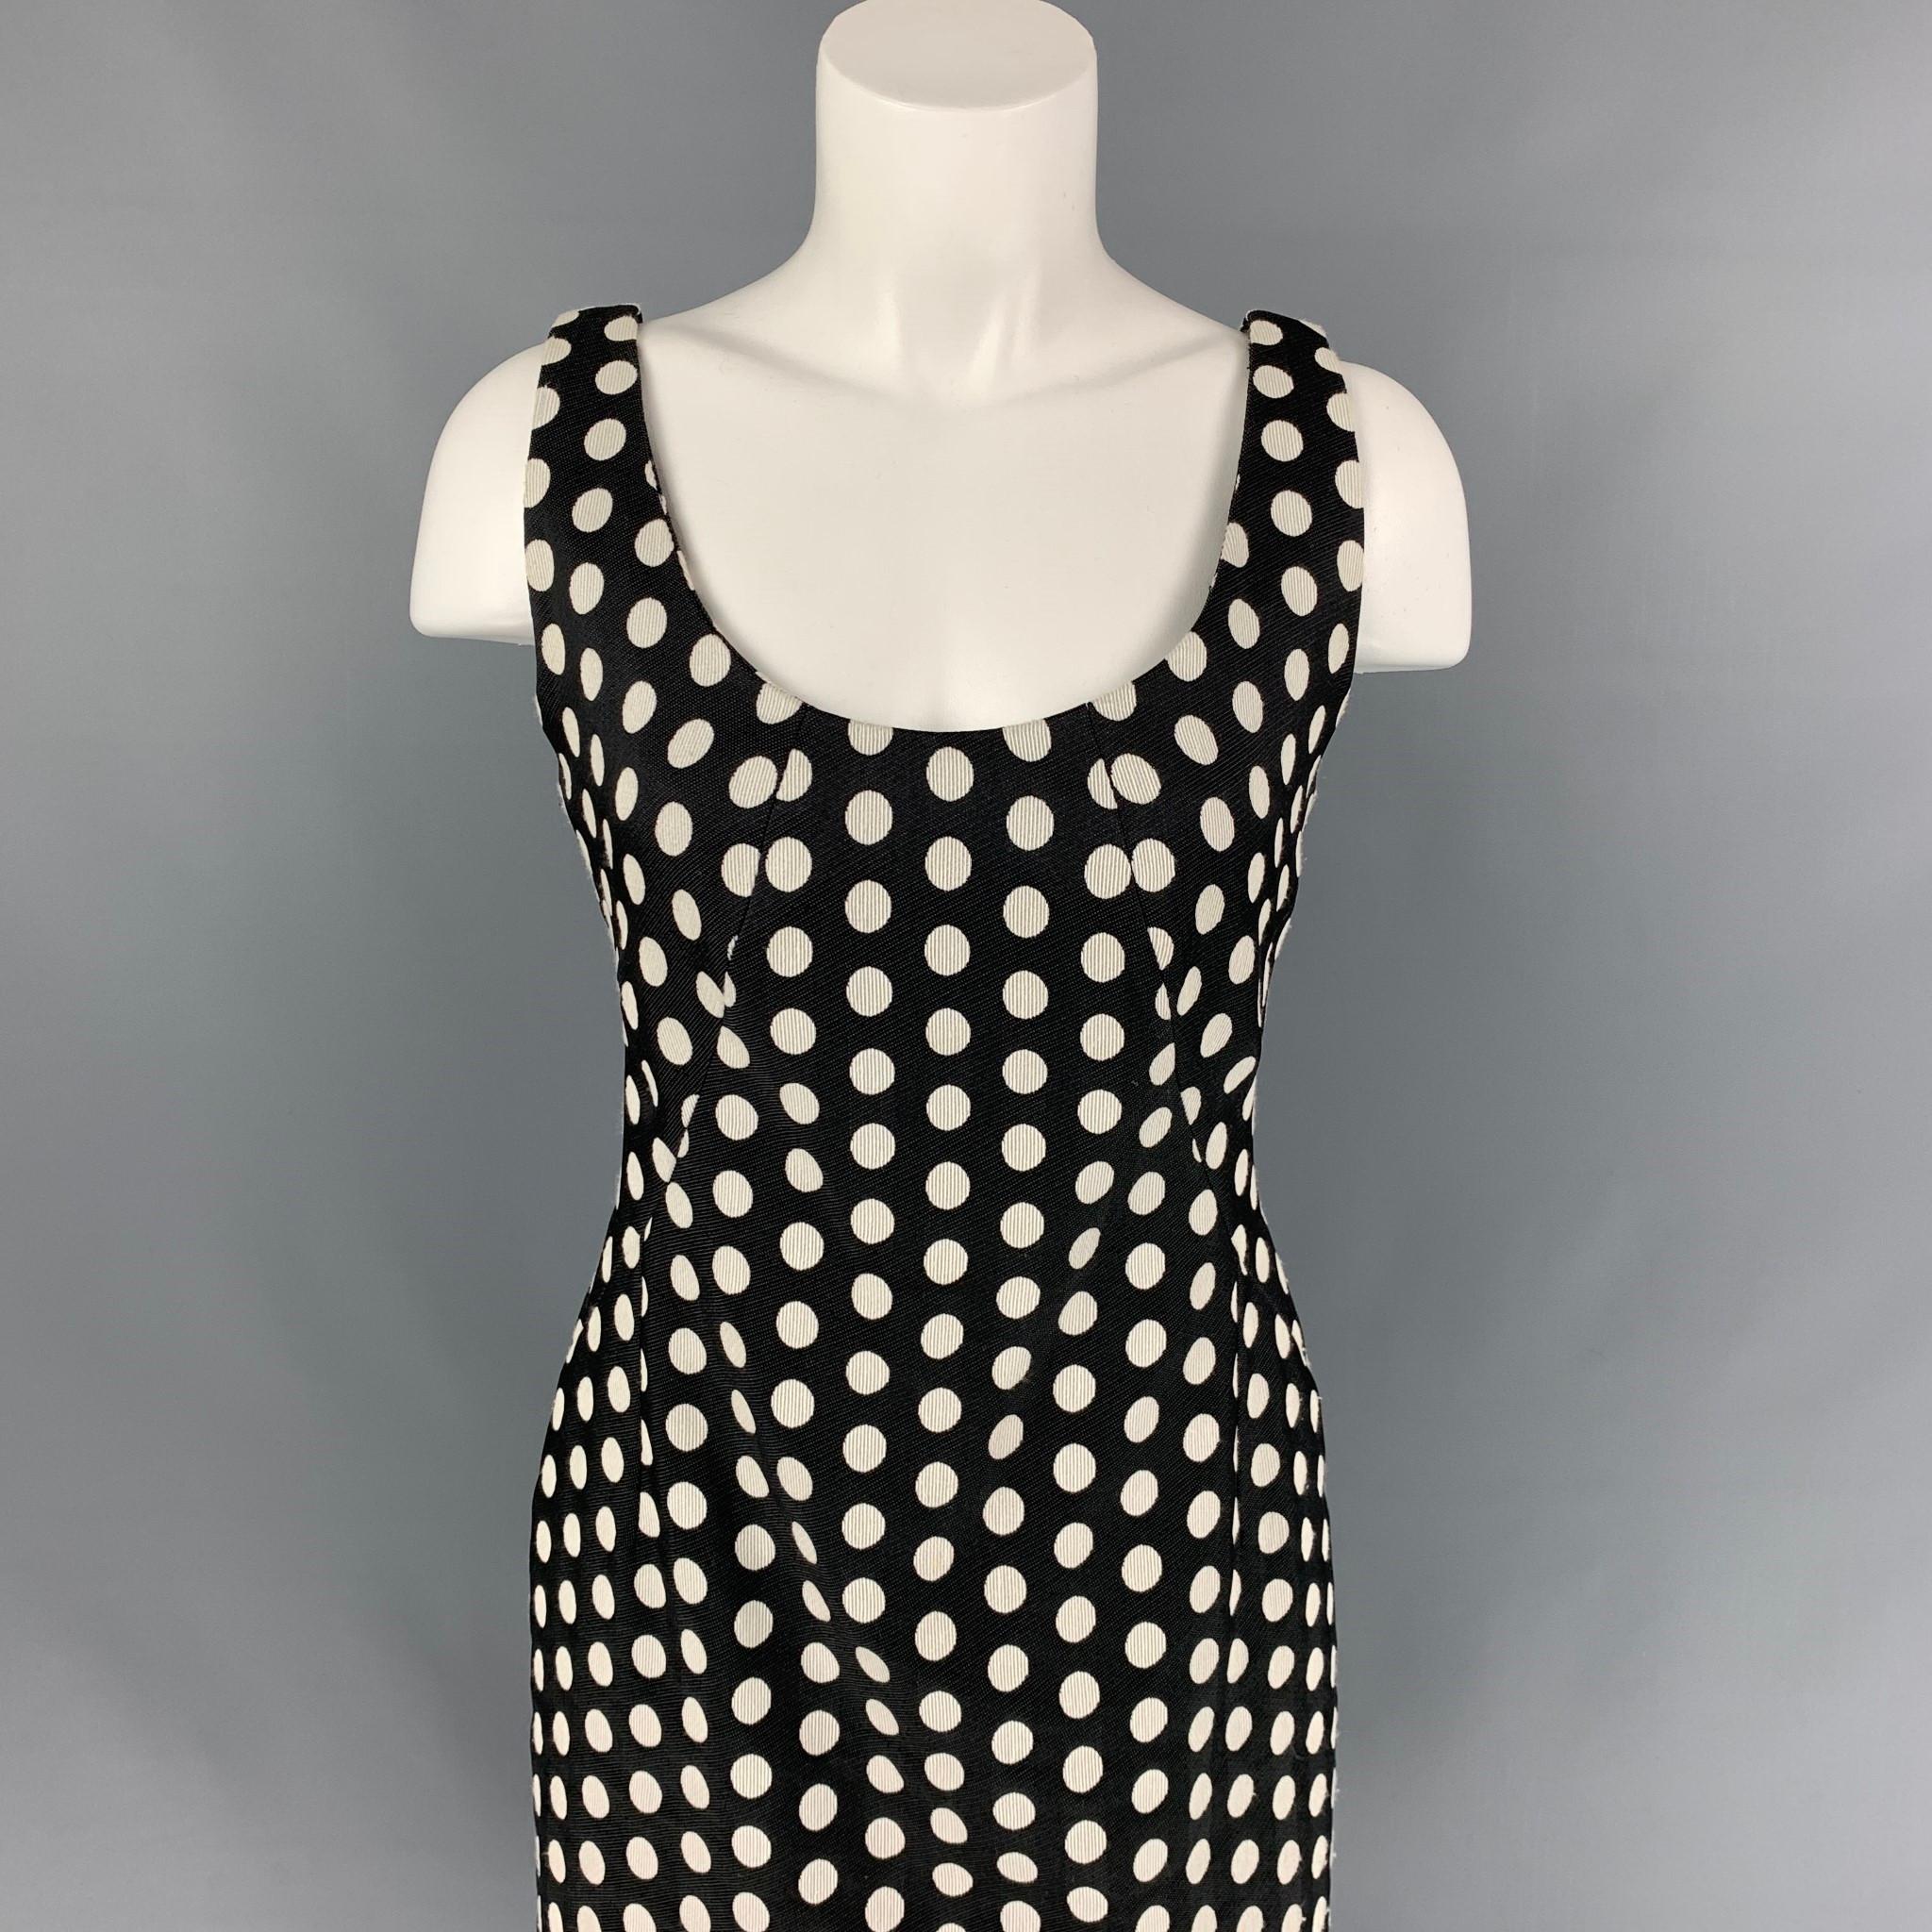 ARMANI COLLEZIONI dress comes in a black & white polka dot material featuring a sheath style, scoop neck, and a back zipper closure. 

Very Good Pre-Owned Condition.
Marked: 8

Measurements:

Bust: 32 in.
Waist: 31 in.
Hip: 34 in.
Length: 29 in. 